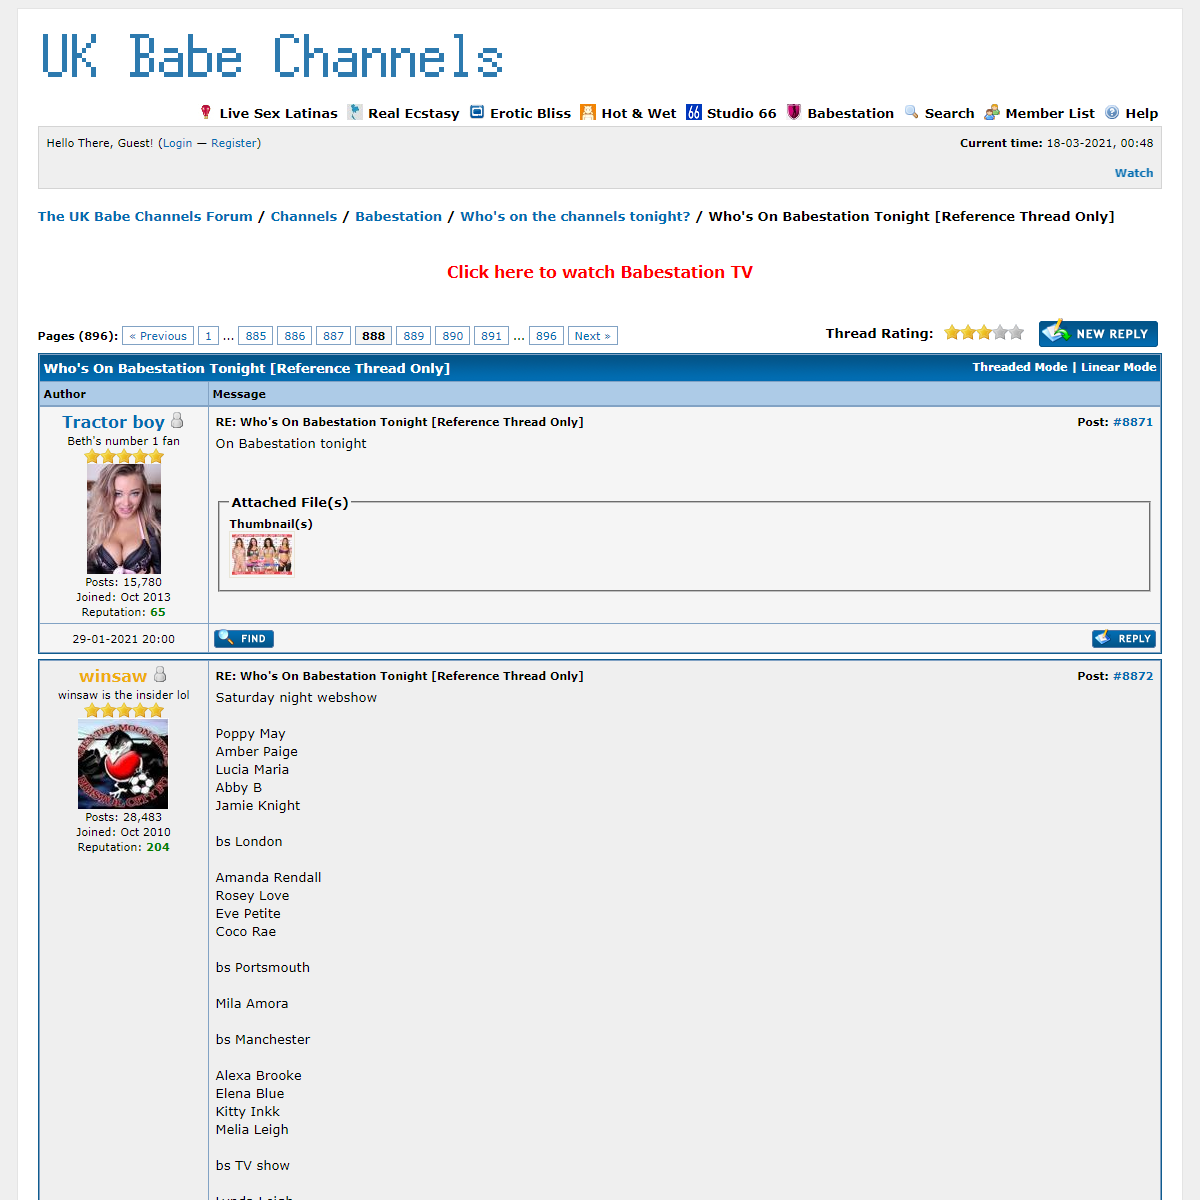 A complete backup of https://www.babeshows.co.uk/showthread.php?tid=19044&page=888